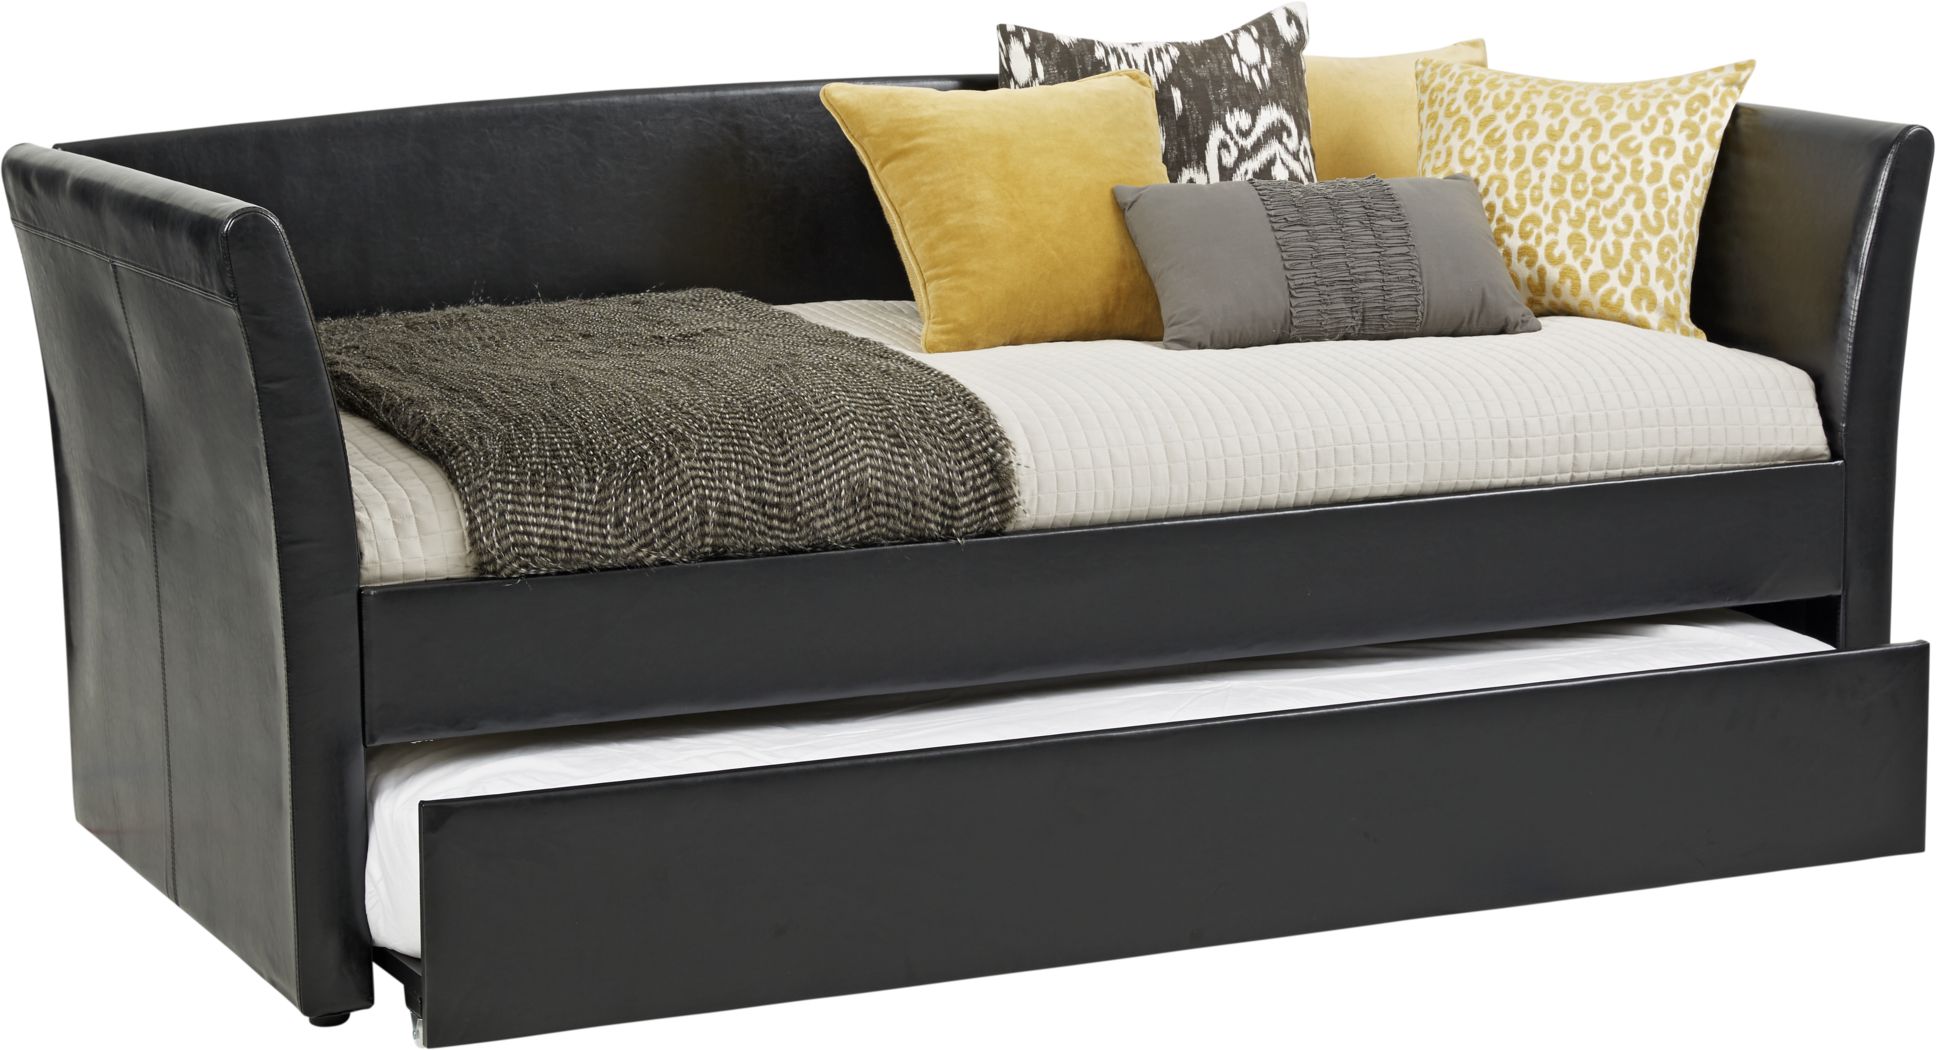 Leather Daybeds With Trundle, Leather Trundle Beds